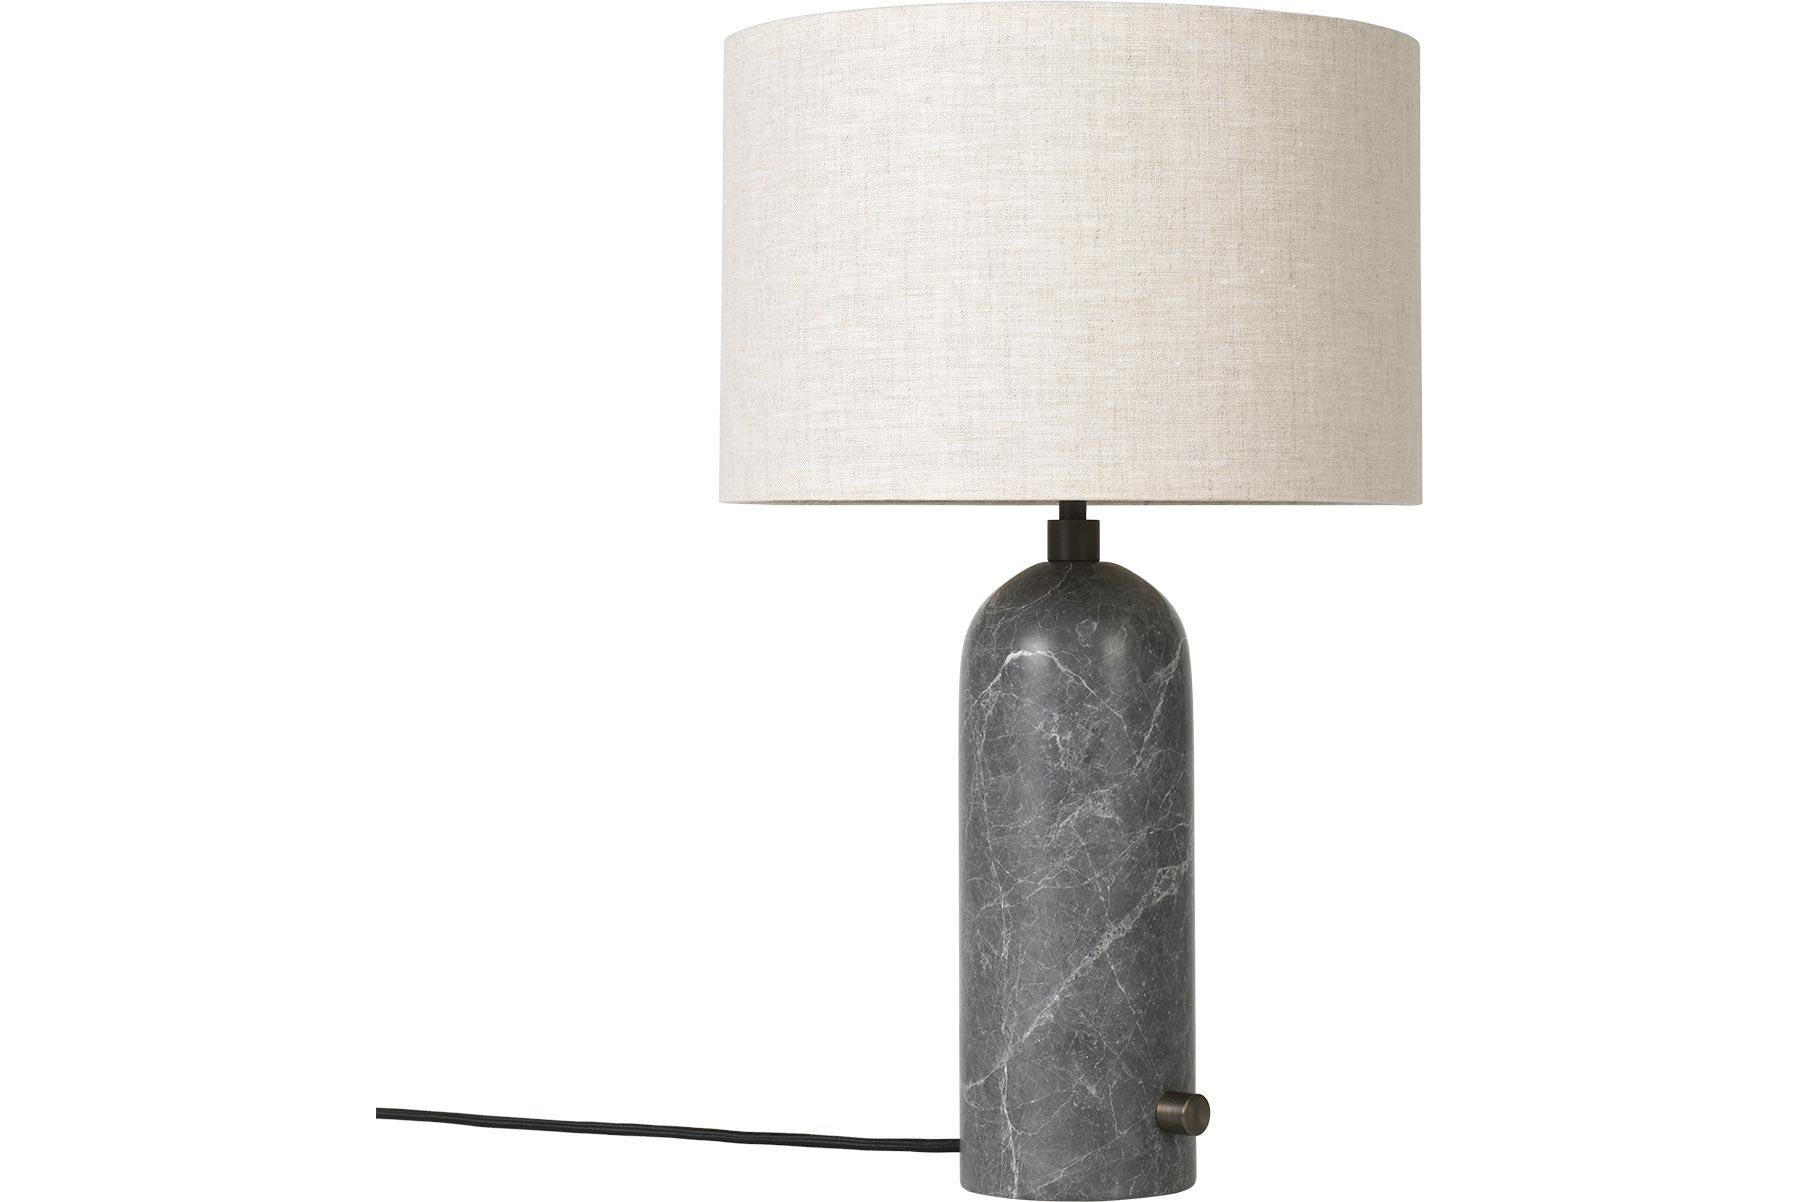 Gravity Table Lamp - Small, Grey Marble, White. For Sale 4